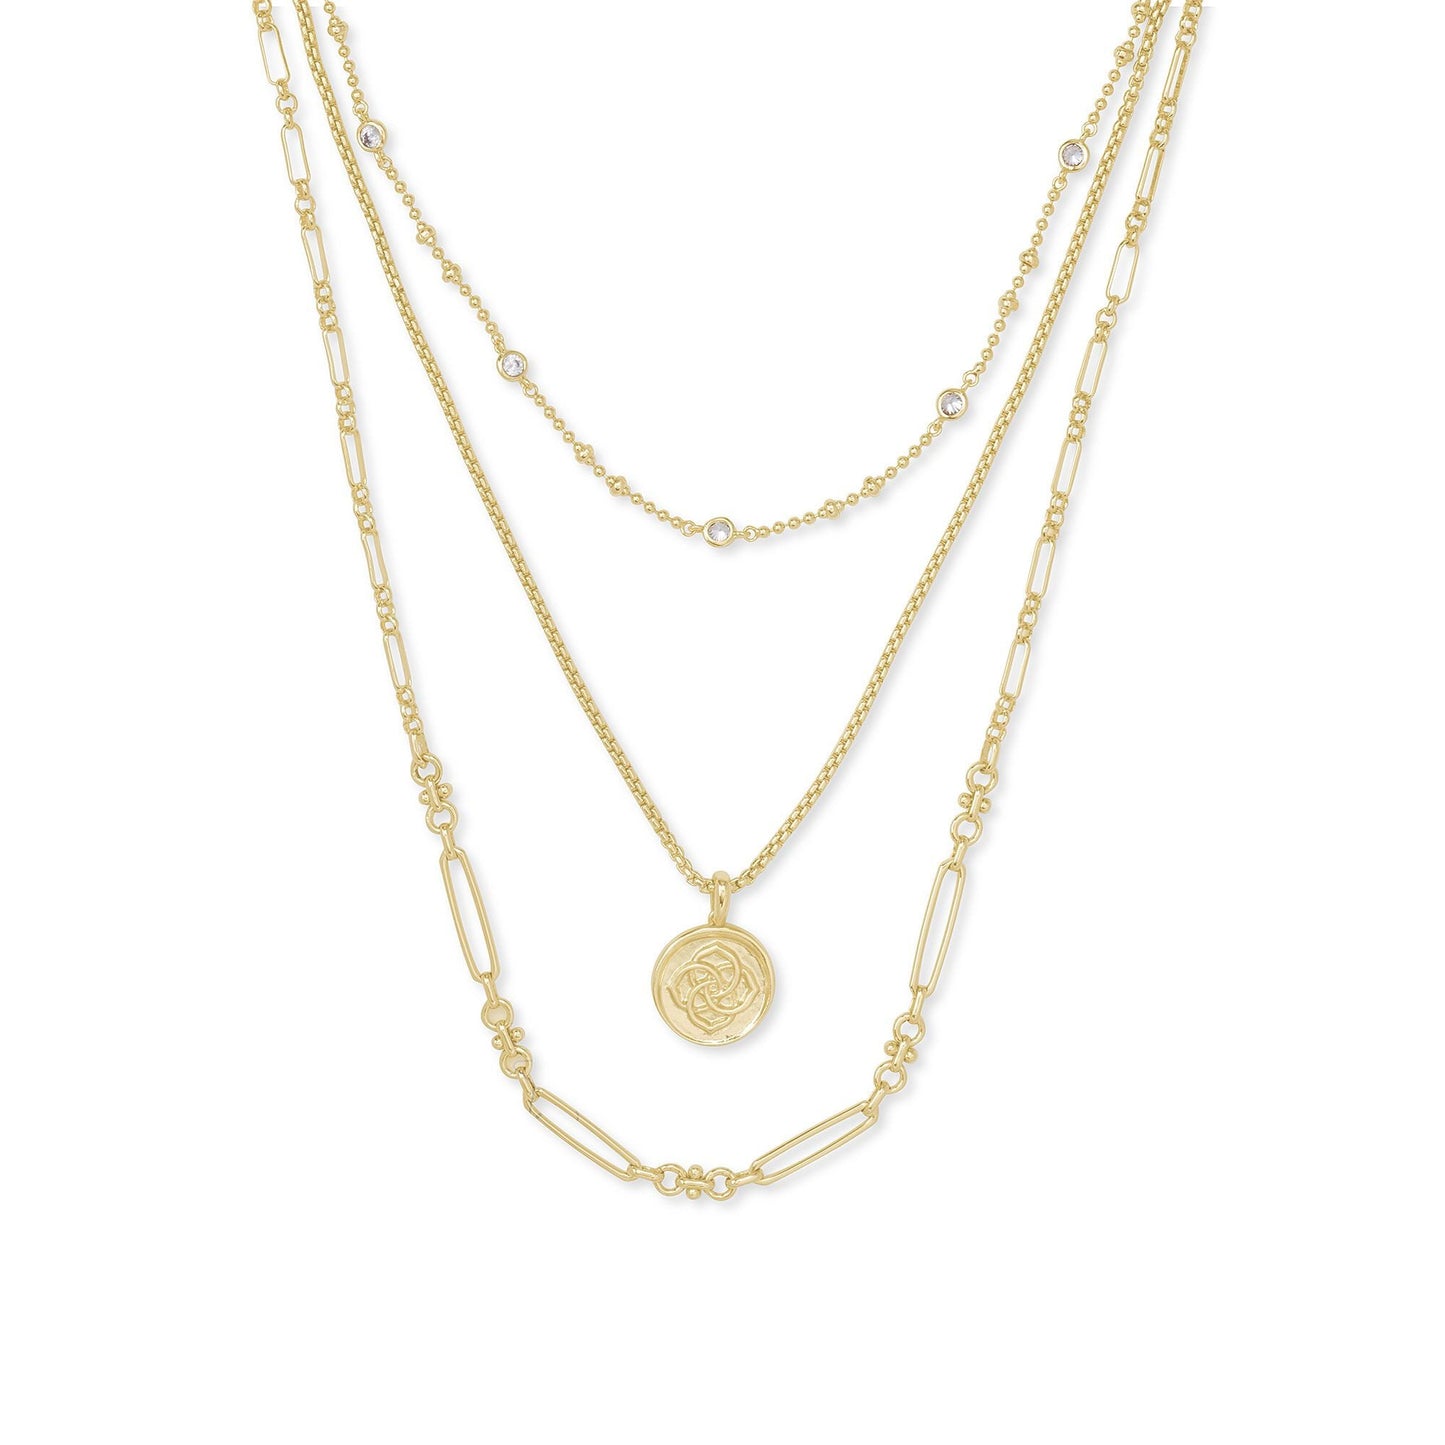 Medallion Coin Triple Strand Necklace in Gold